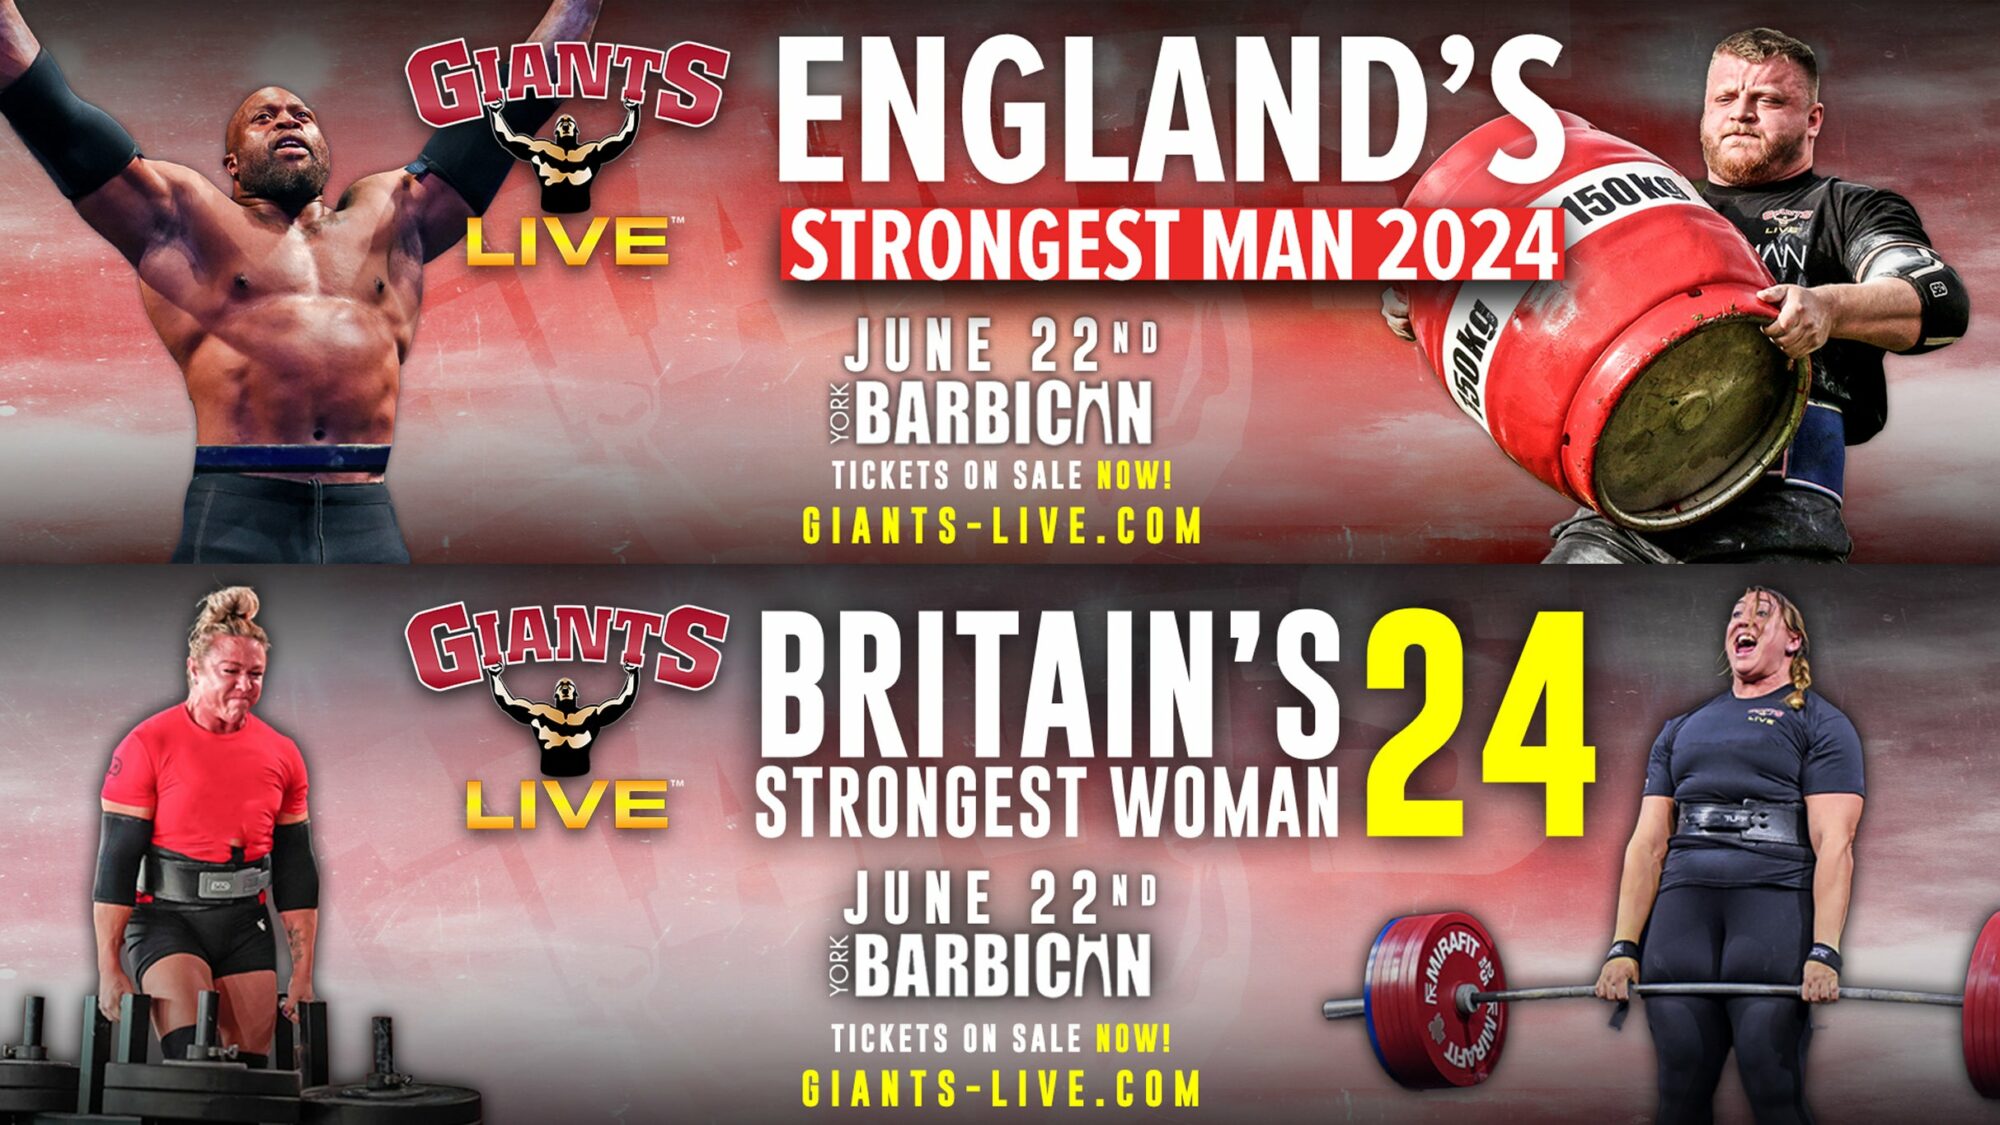 Image name Englands Strongest Man Britains Strongest Woman All Day Ticket at York Barbican York the 5 image from the post England's Strongest Man & Britain's Strongest Woman - All Day Ticket at York Barbican, York in Yorkshire.com.